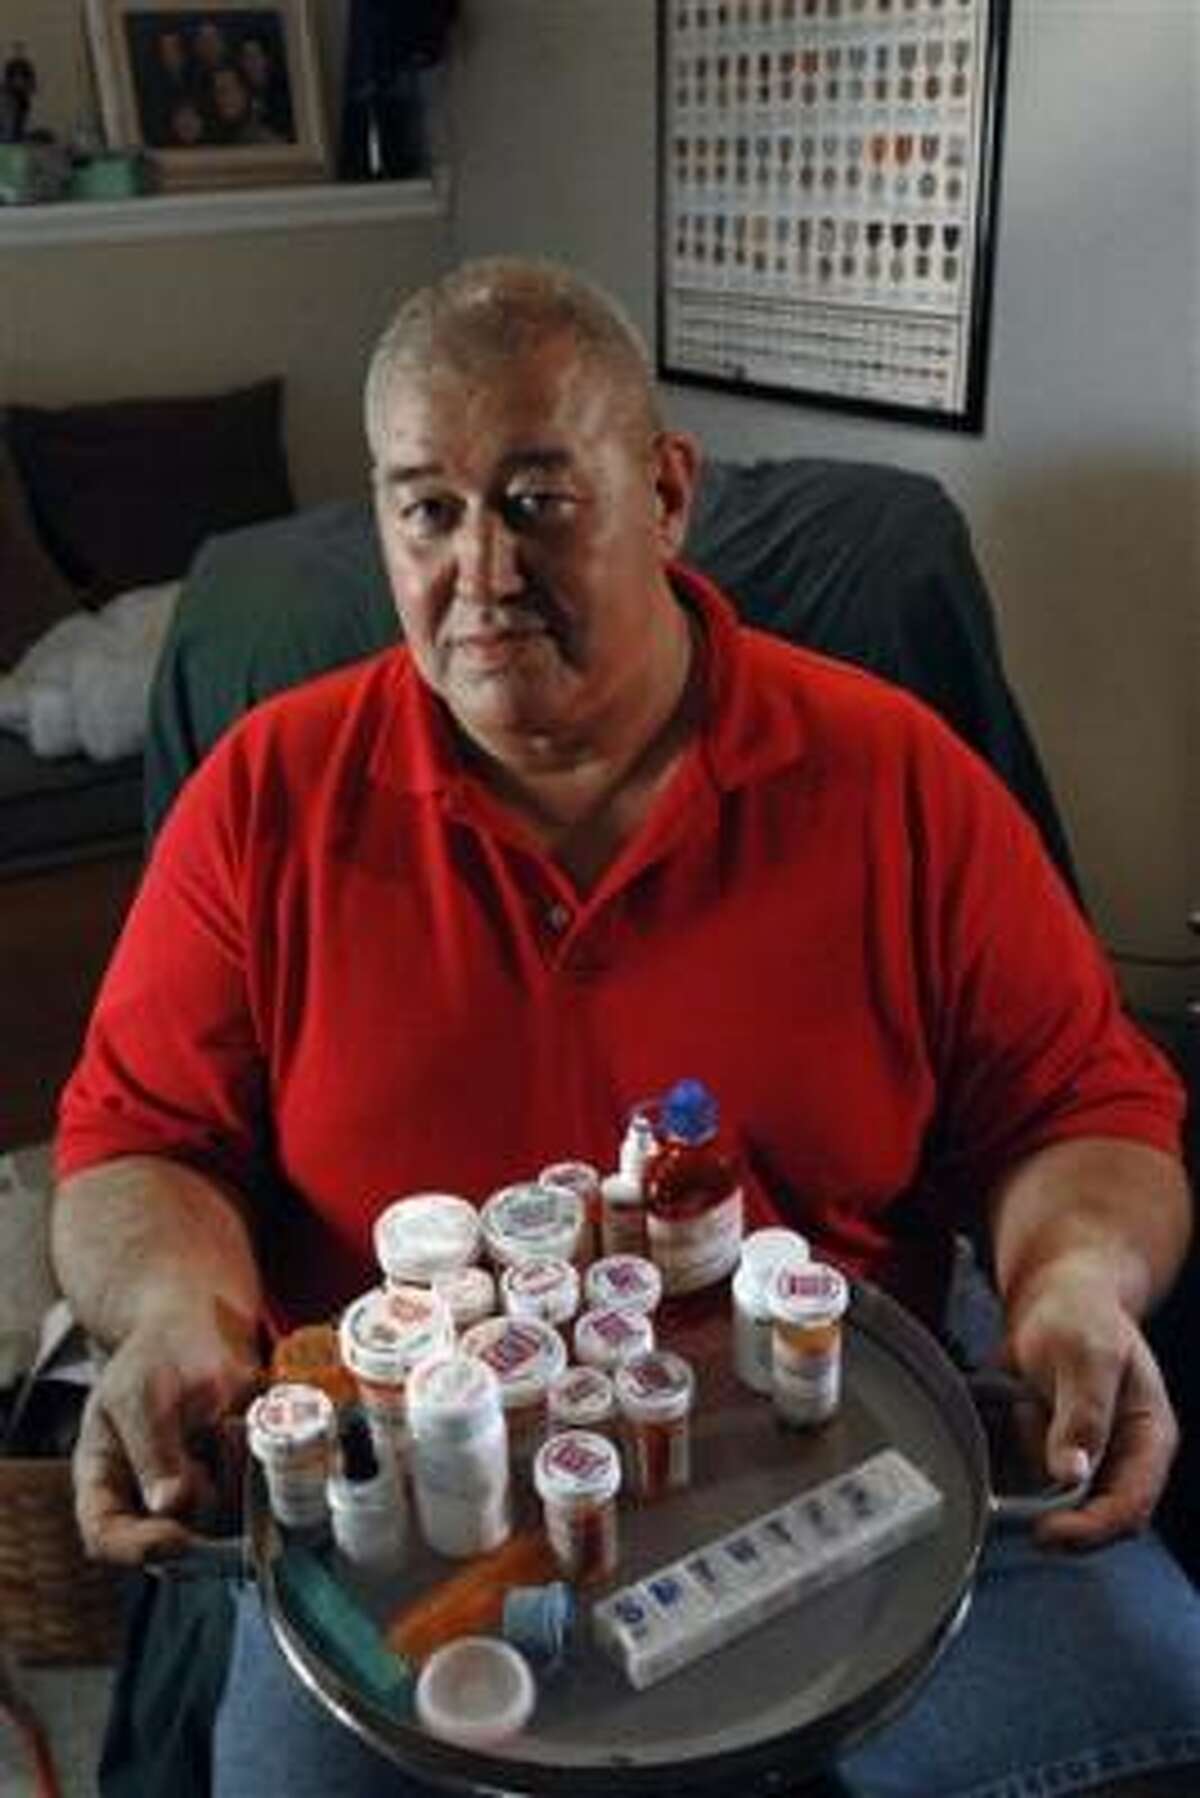 Retired Marine Staff Sgt. James Fernandez, 54, of Fredericksburg, Va., takes the equivalent of nine painkillers containing oxycodone every day.